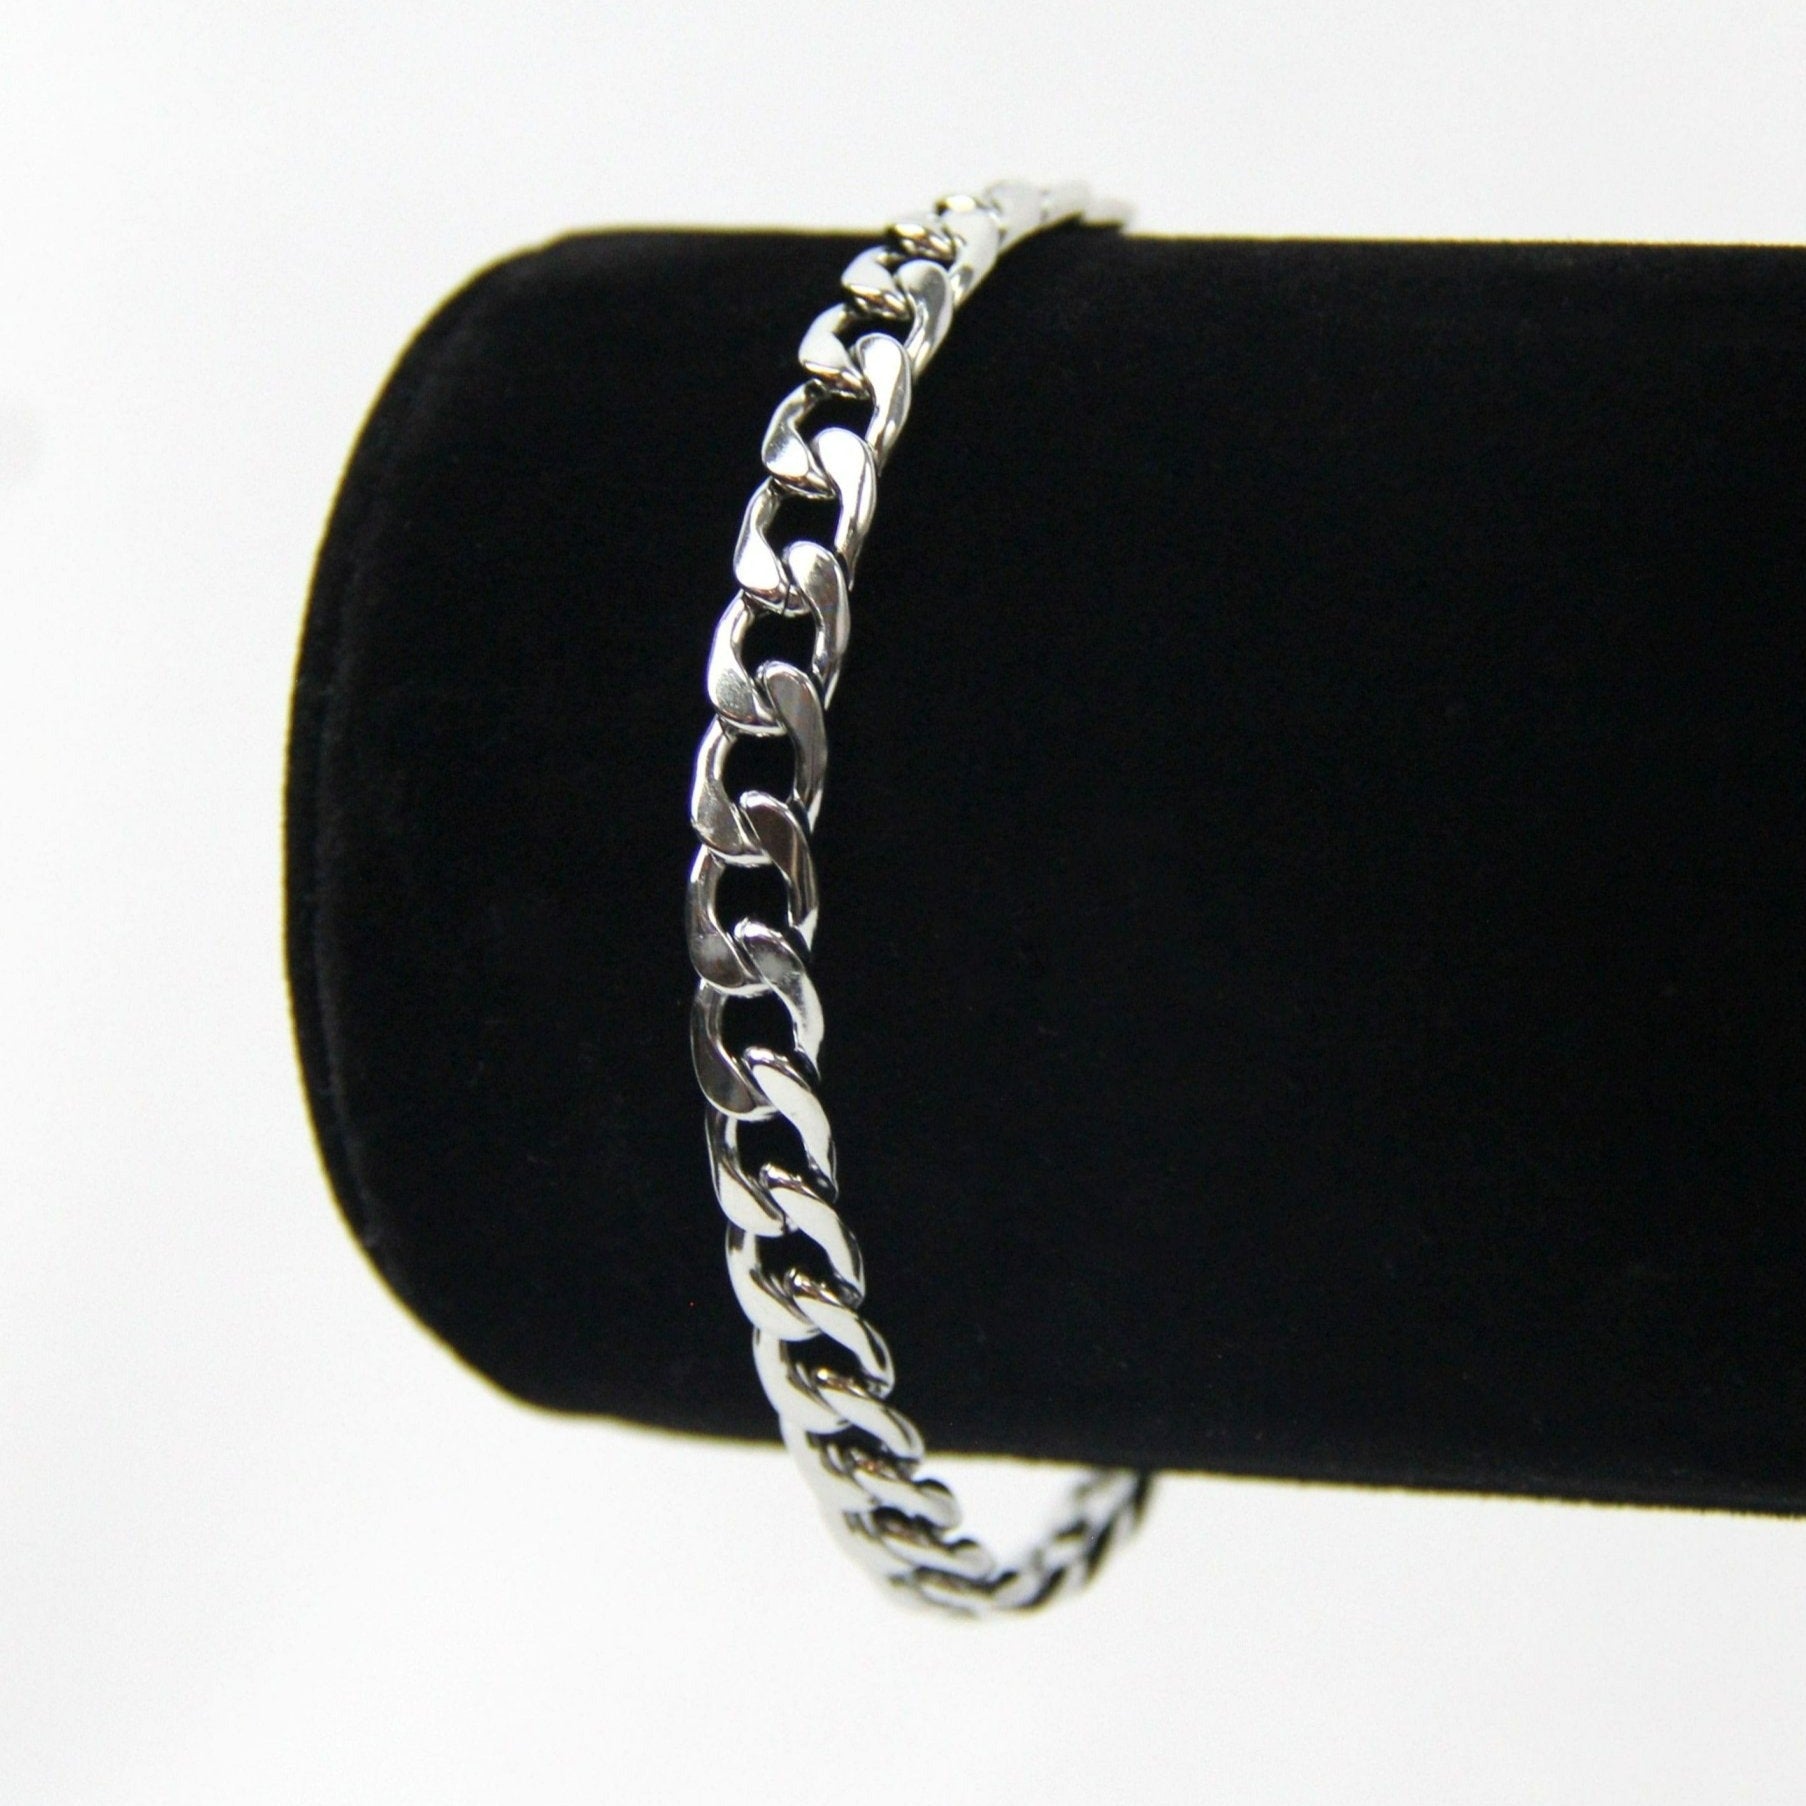 Silver Mens Bracelet Curb Chain Silver Bracelets Man Bracelets Mens Woman's  Bracelet Curb Link Bracelet Mens Woman Jewellery Gift -  Canada